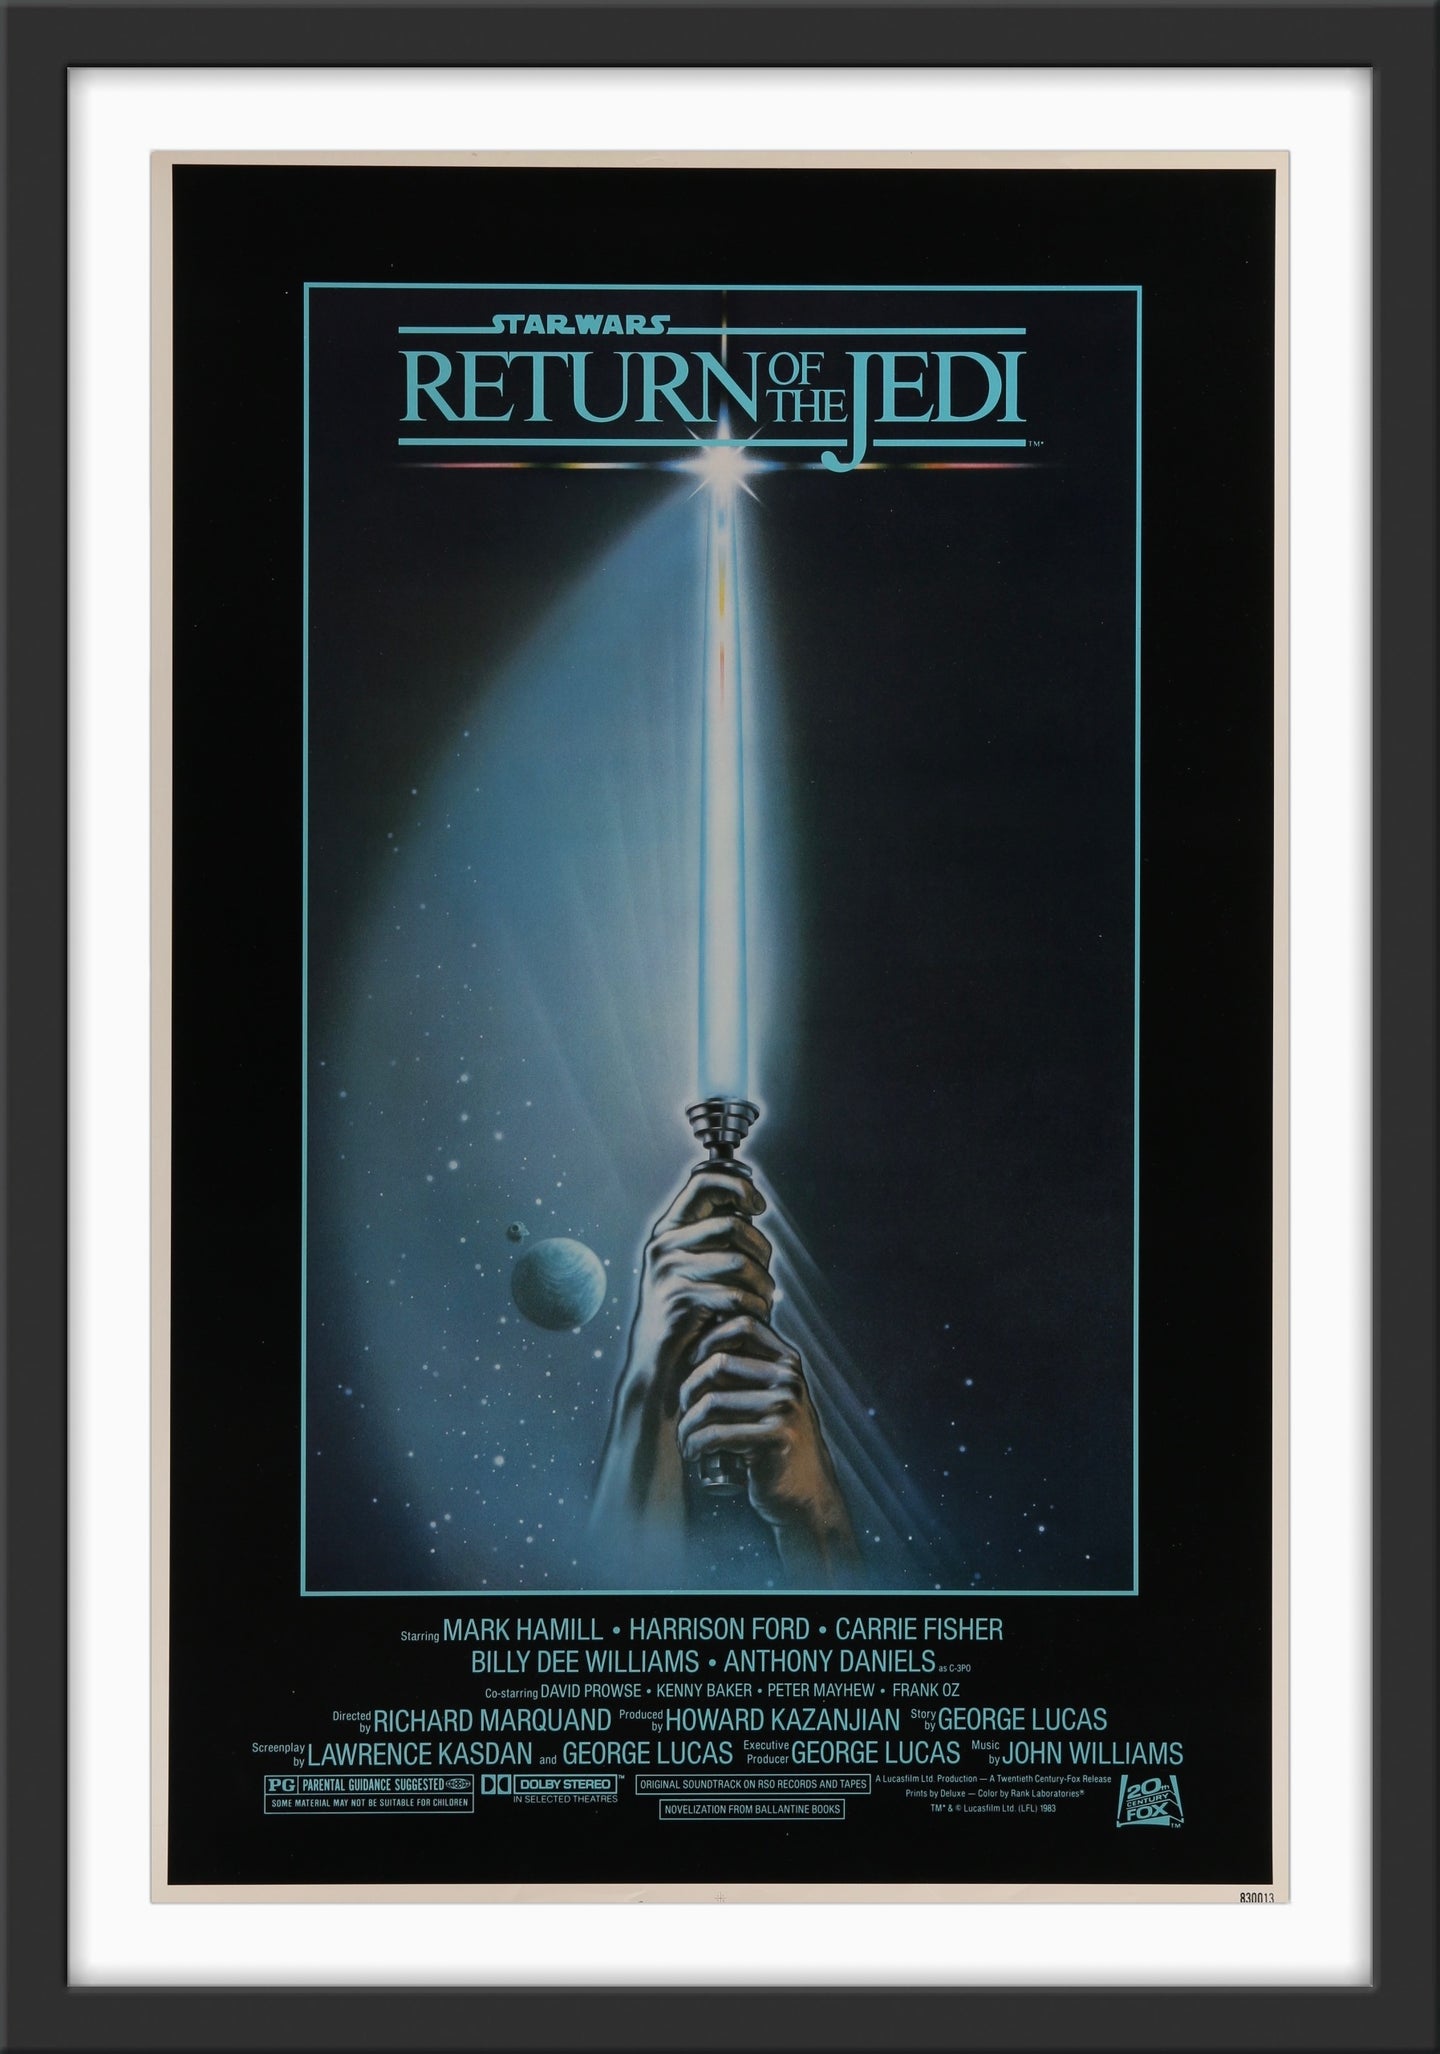 An original movie poster for the Star Wars film Return of the Jedi